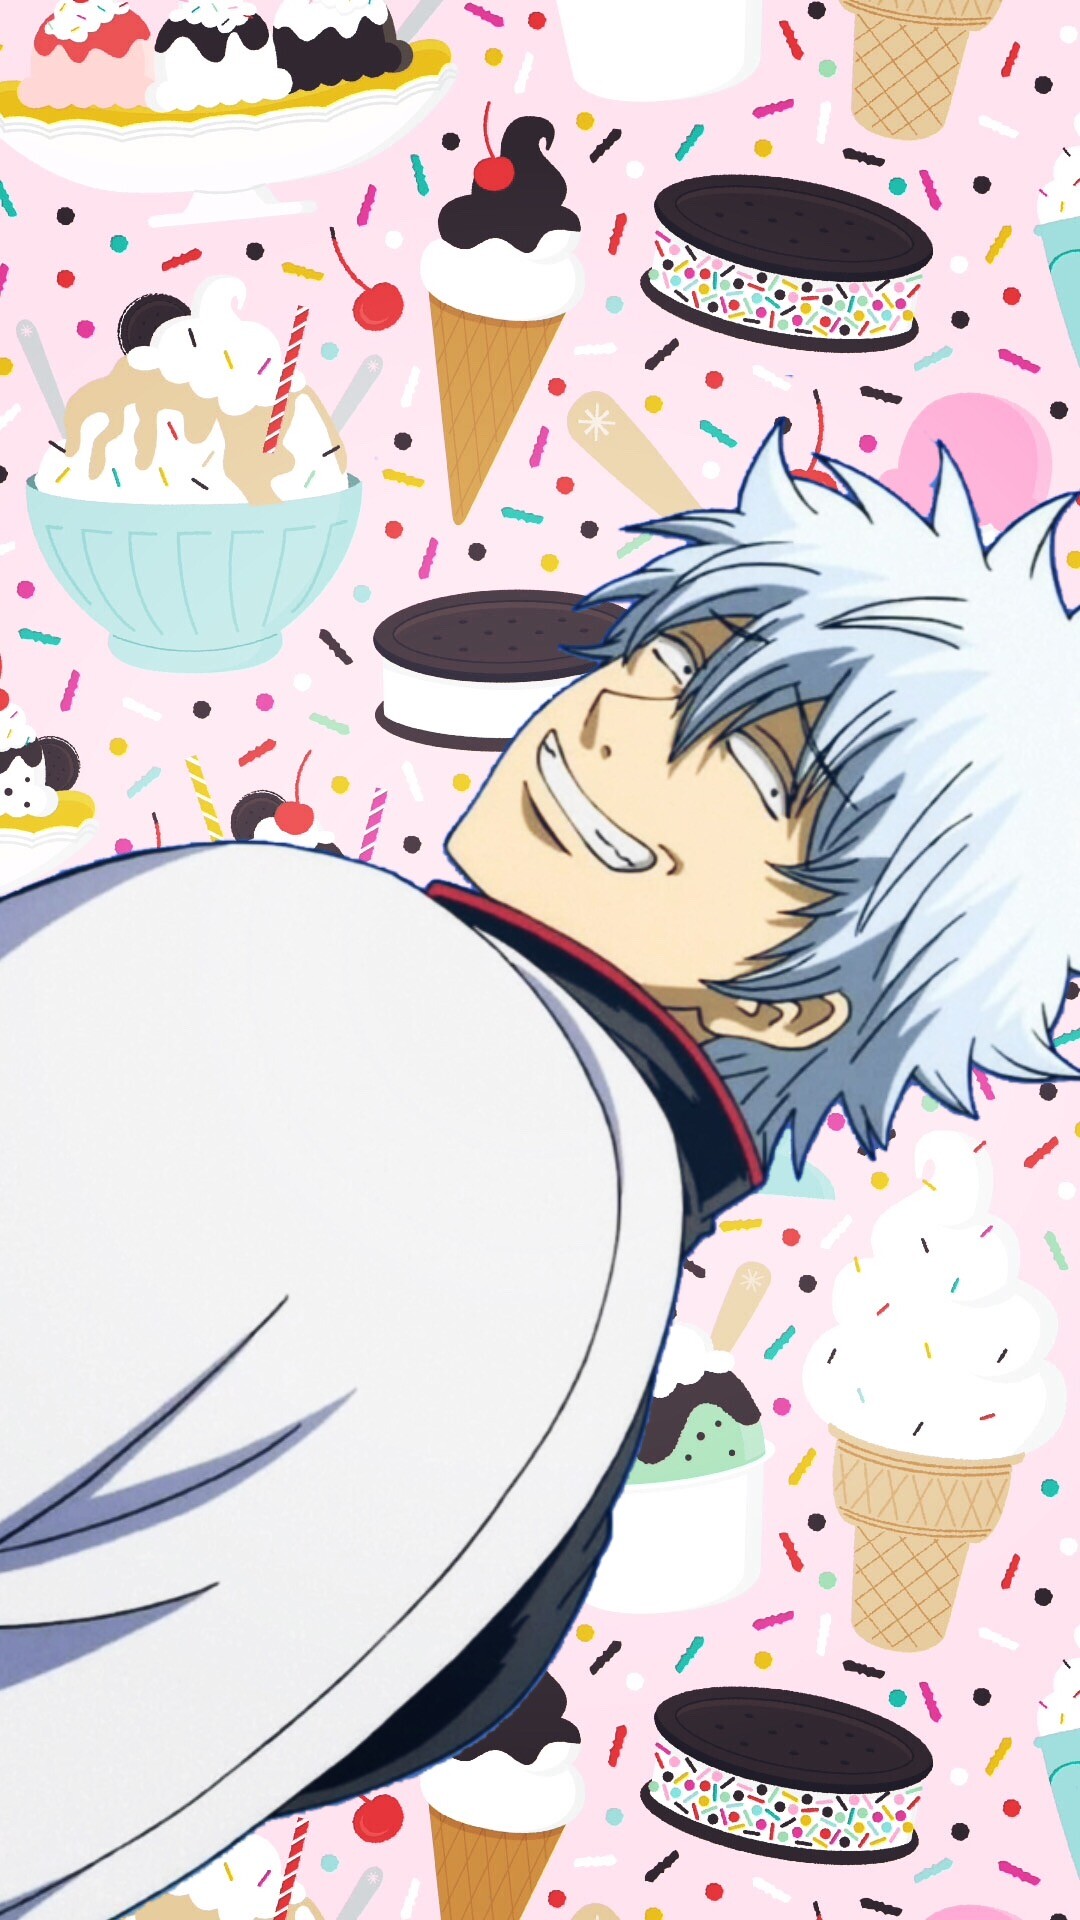 Gintoki Sakata: Manga character, Obsessed with sweet food such as parfaits, ice cream and cakes. 1080x1920 Full HD Wallpaper.